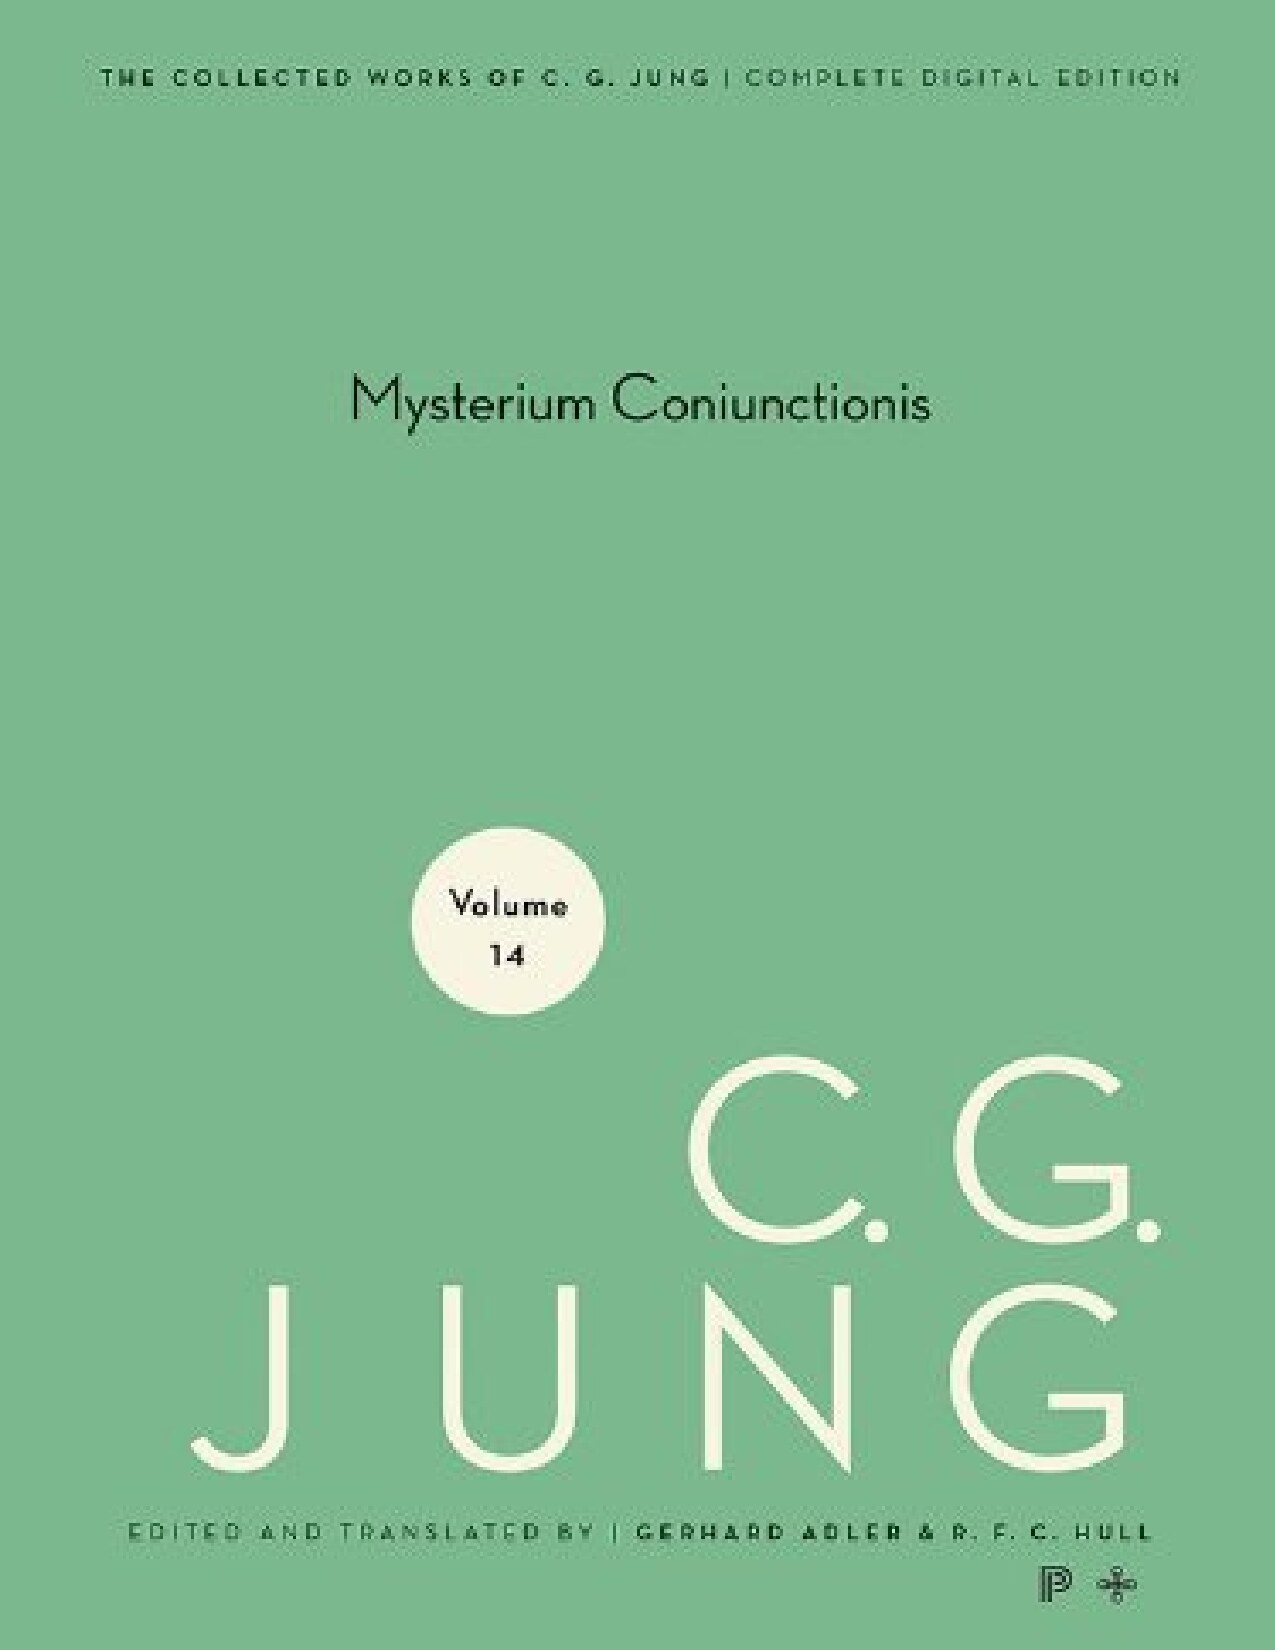 The Collected Works of C. G. Jung: Volume 14 - Mysterium Coniunctionis